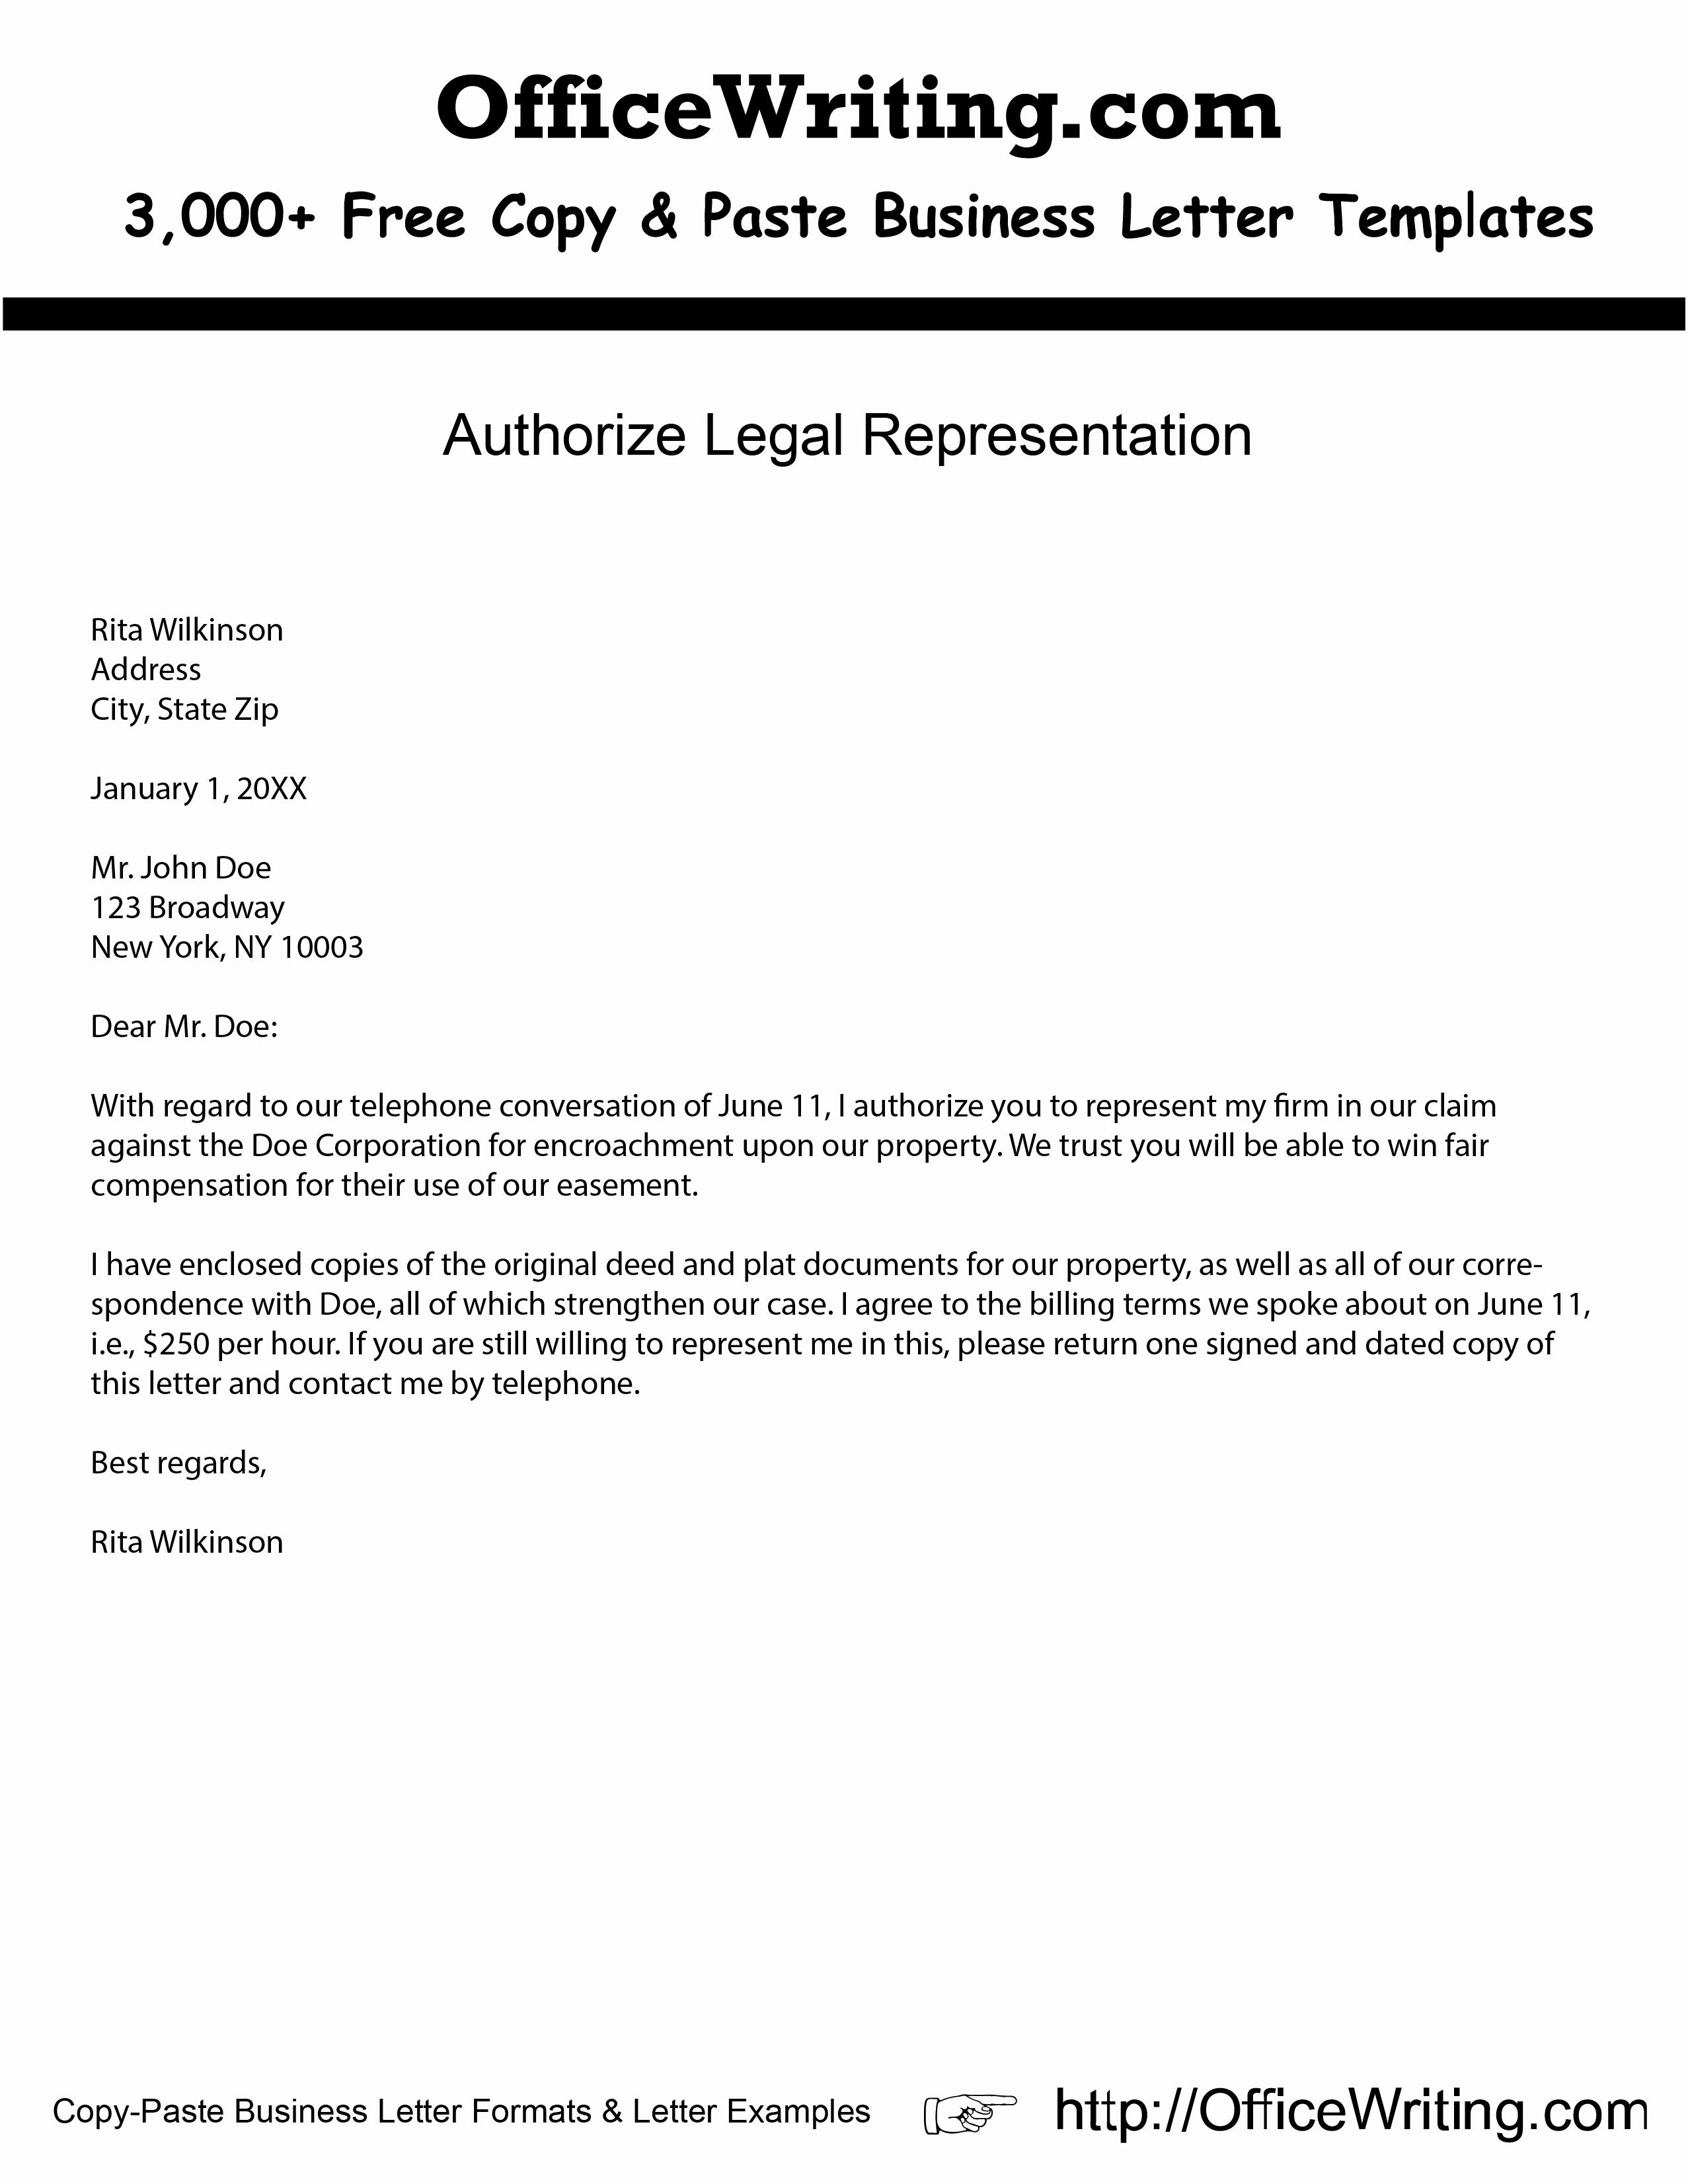 Free Business Letter Template Beautiful Authorize Legal Representation Download Free Business